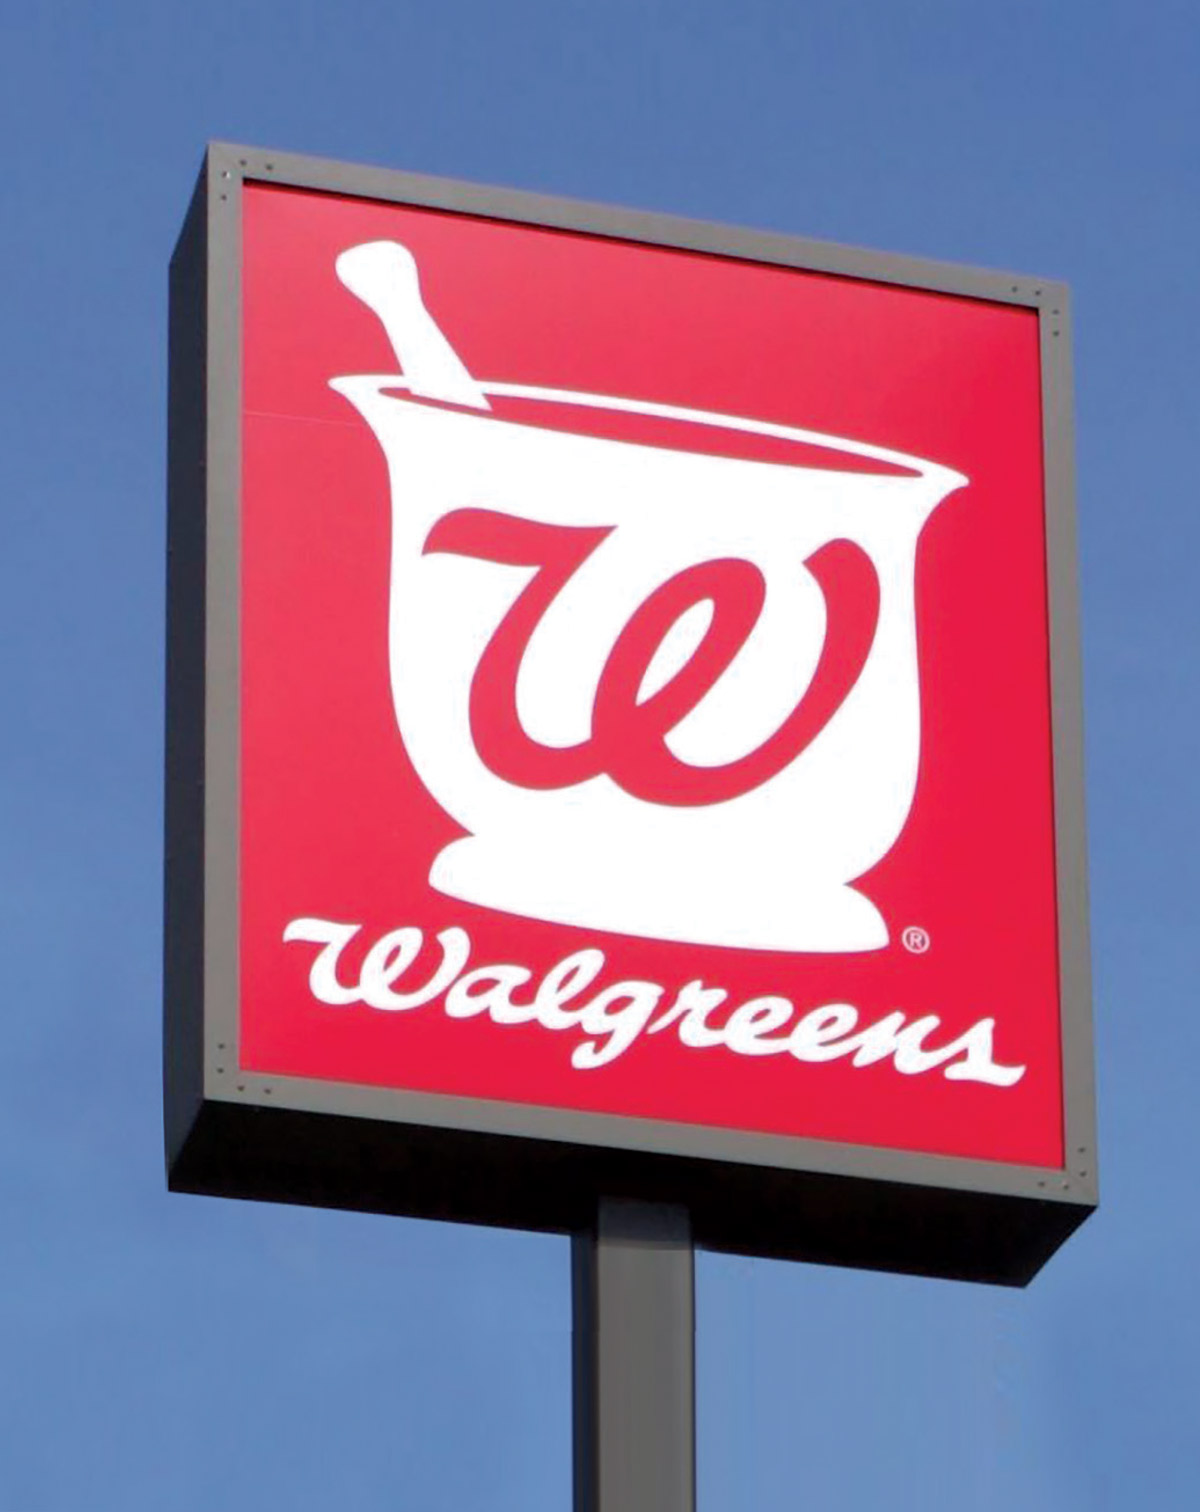 A photograph of a Walgreens sign with a mortar-and-pestle logo.